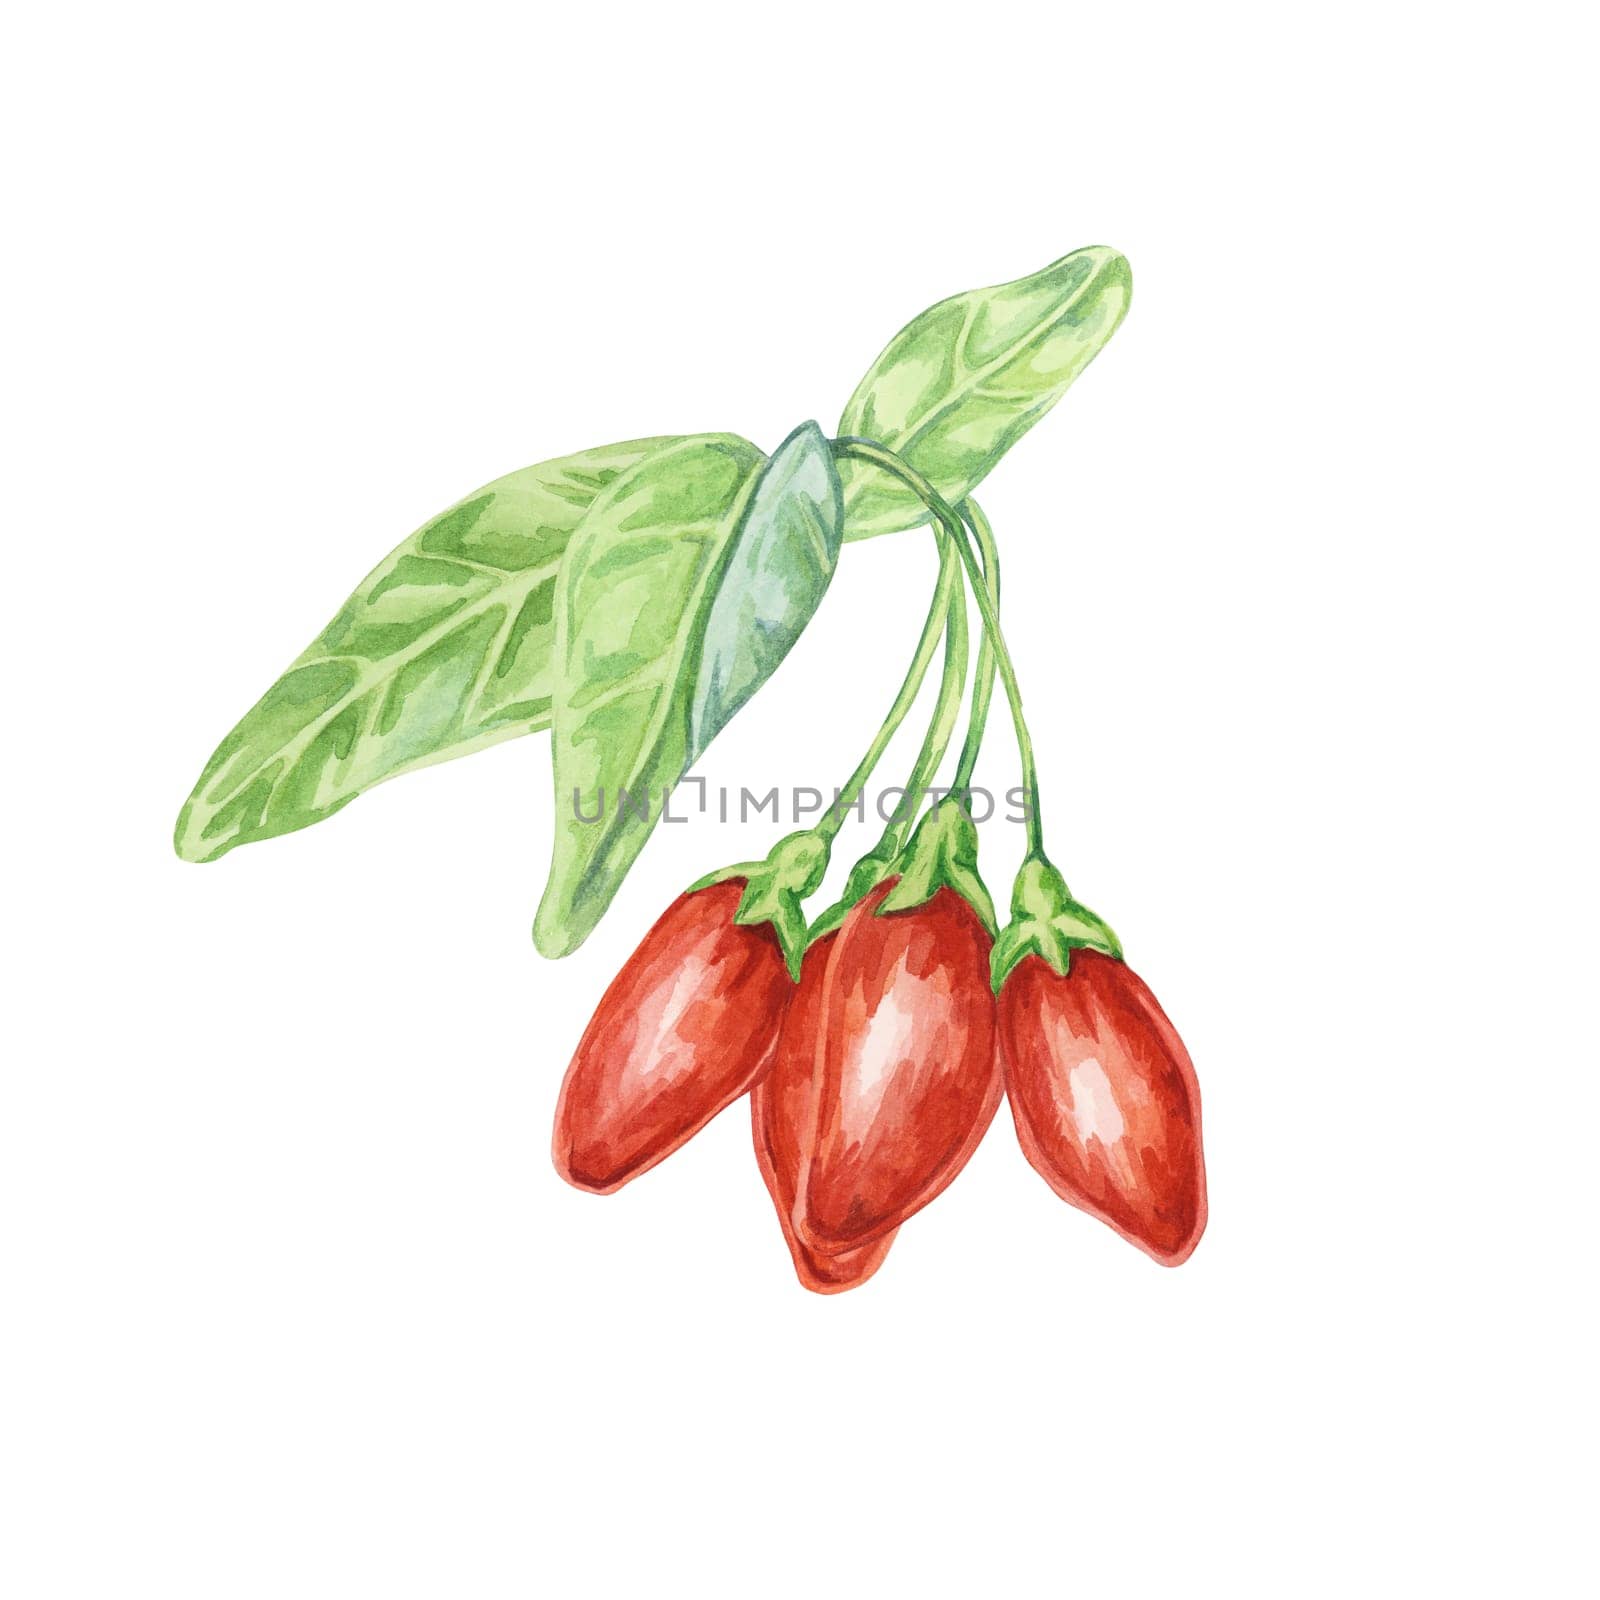 Composition of goji berries in watercolor by Fofito